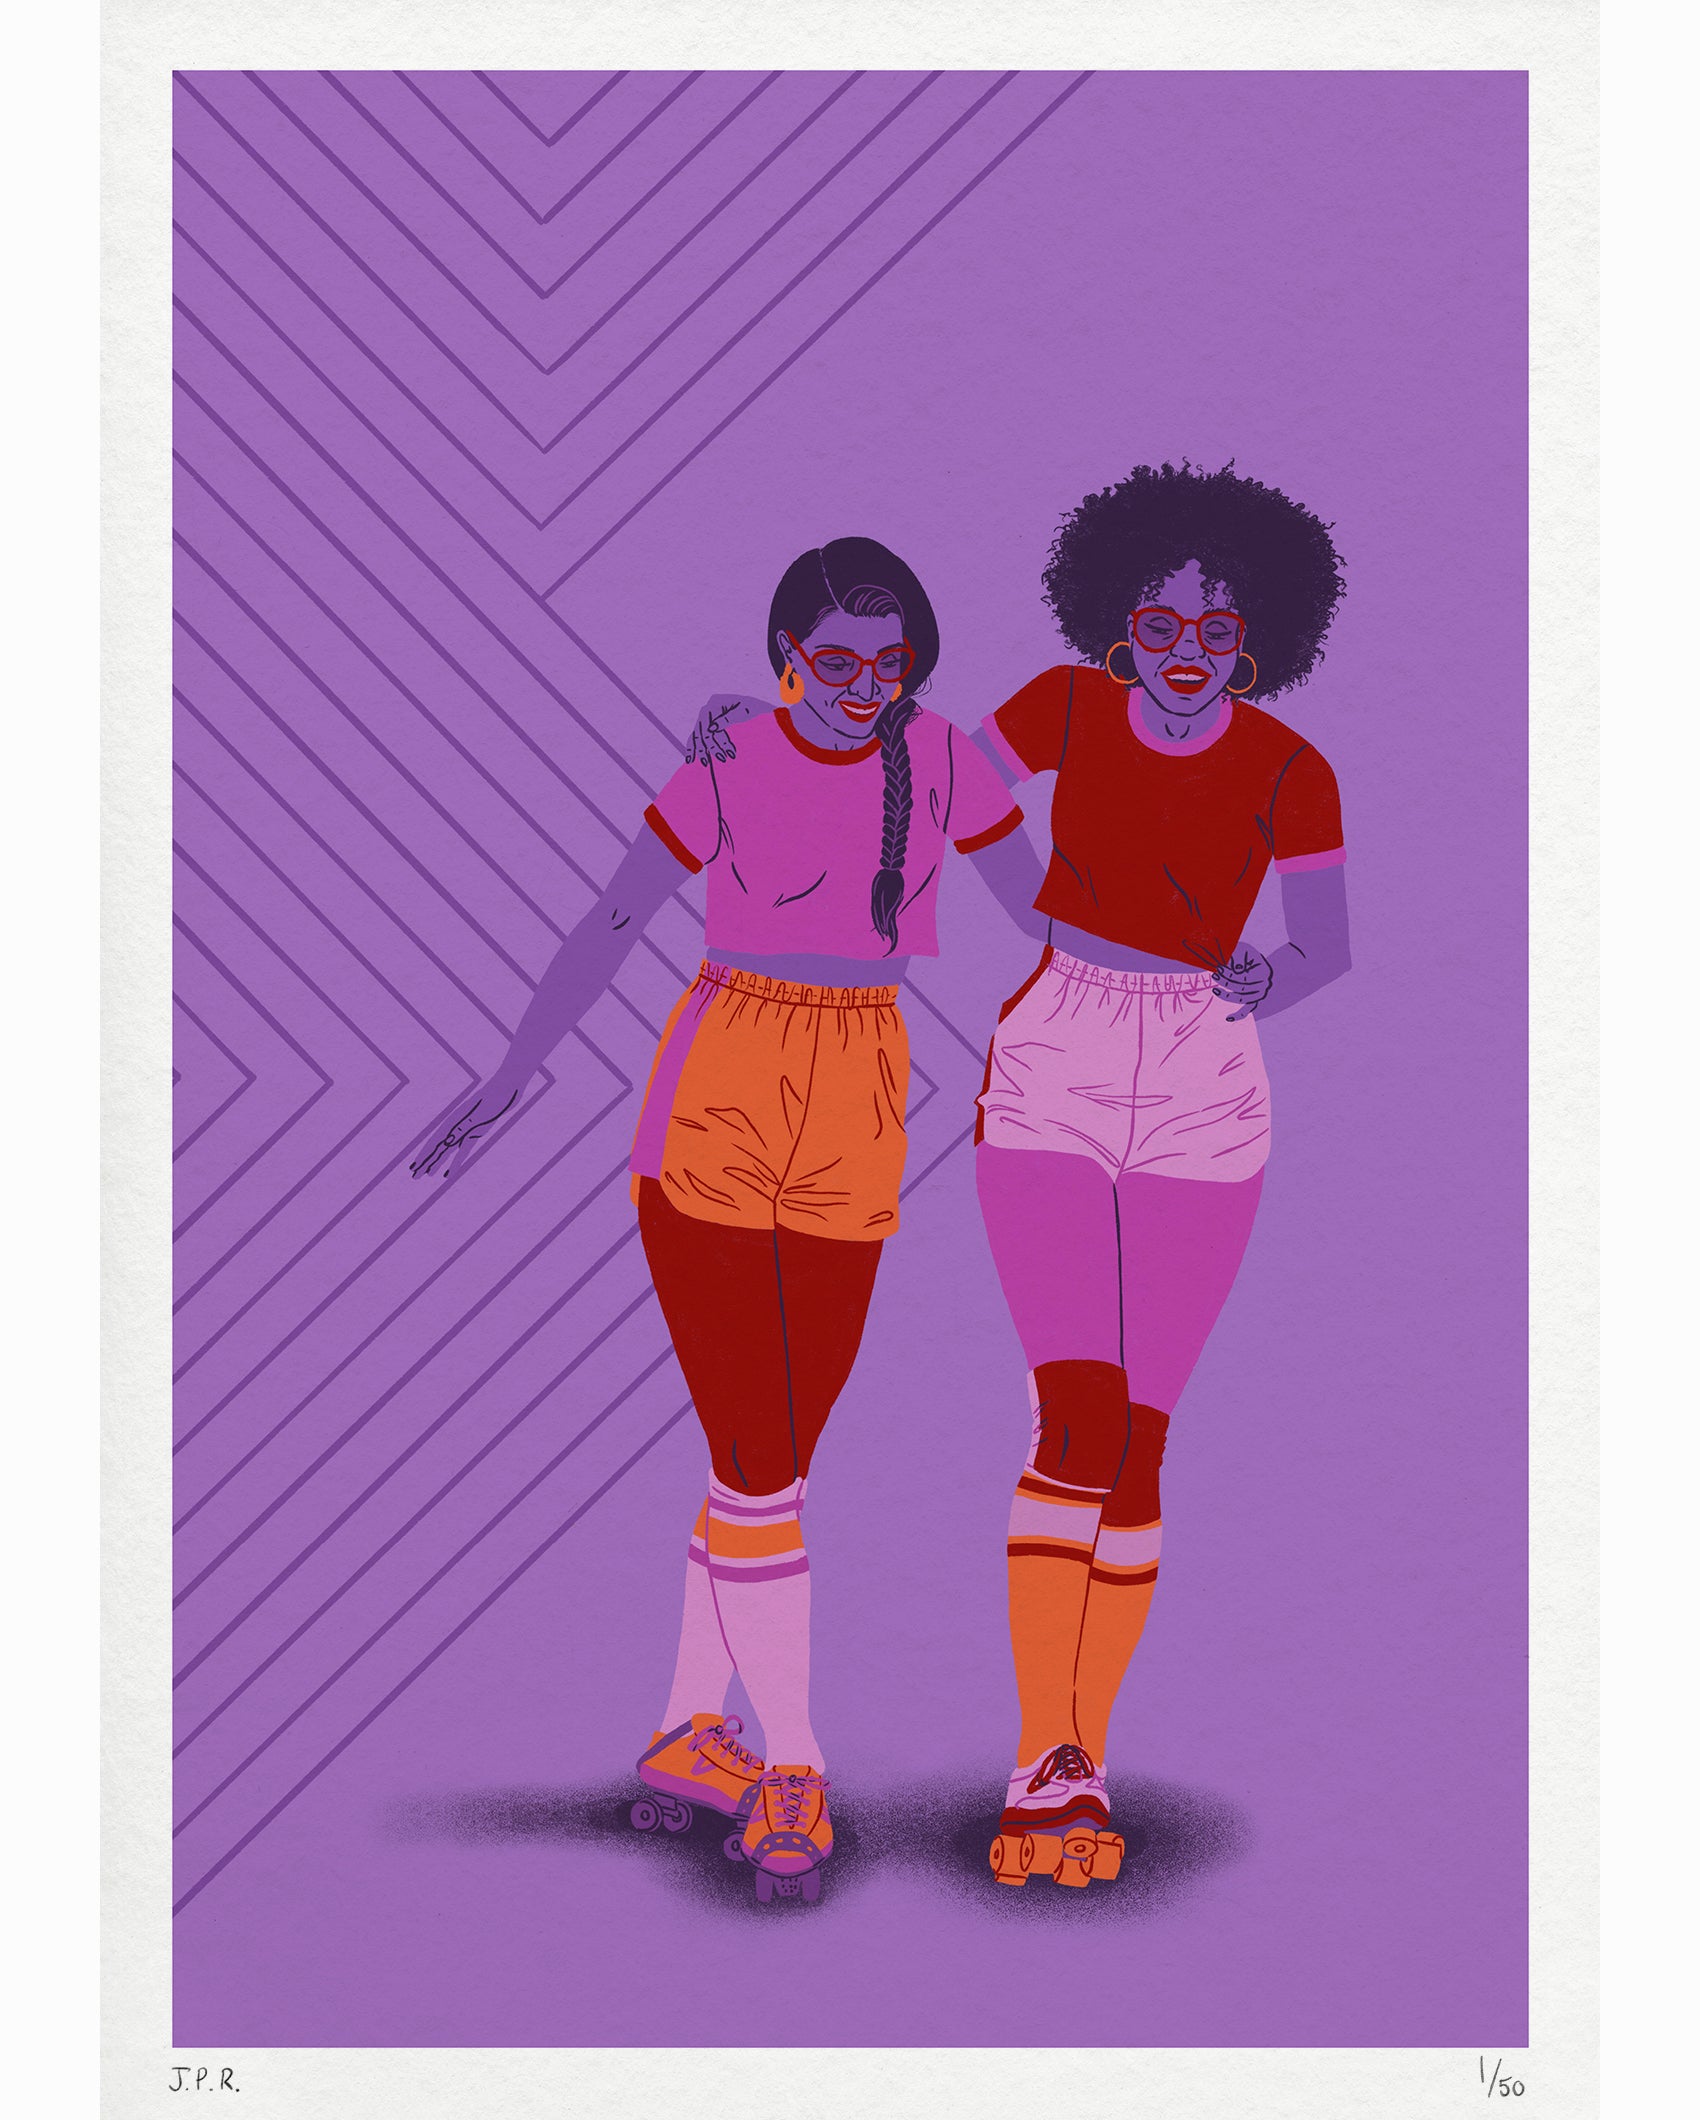 Illustration of two women helping each other to roller skate.